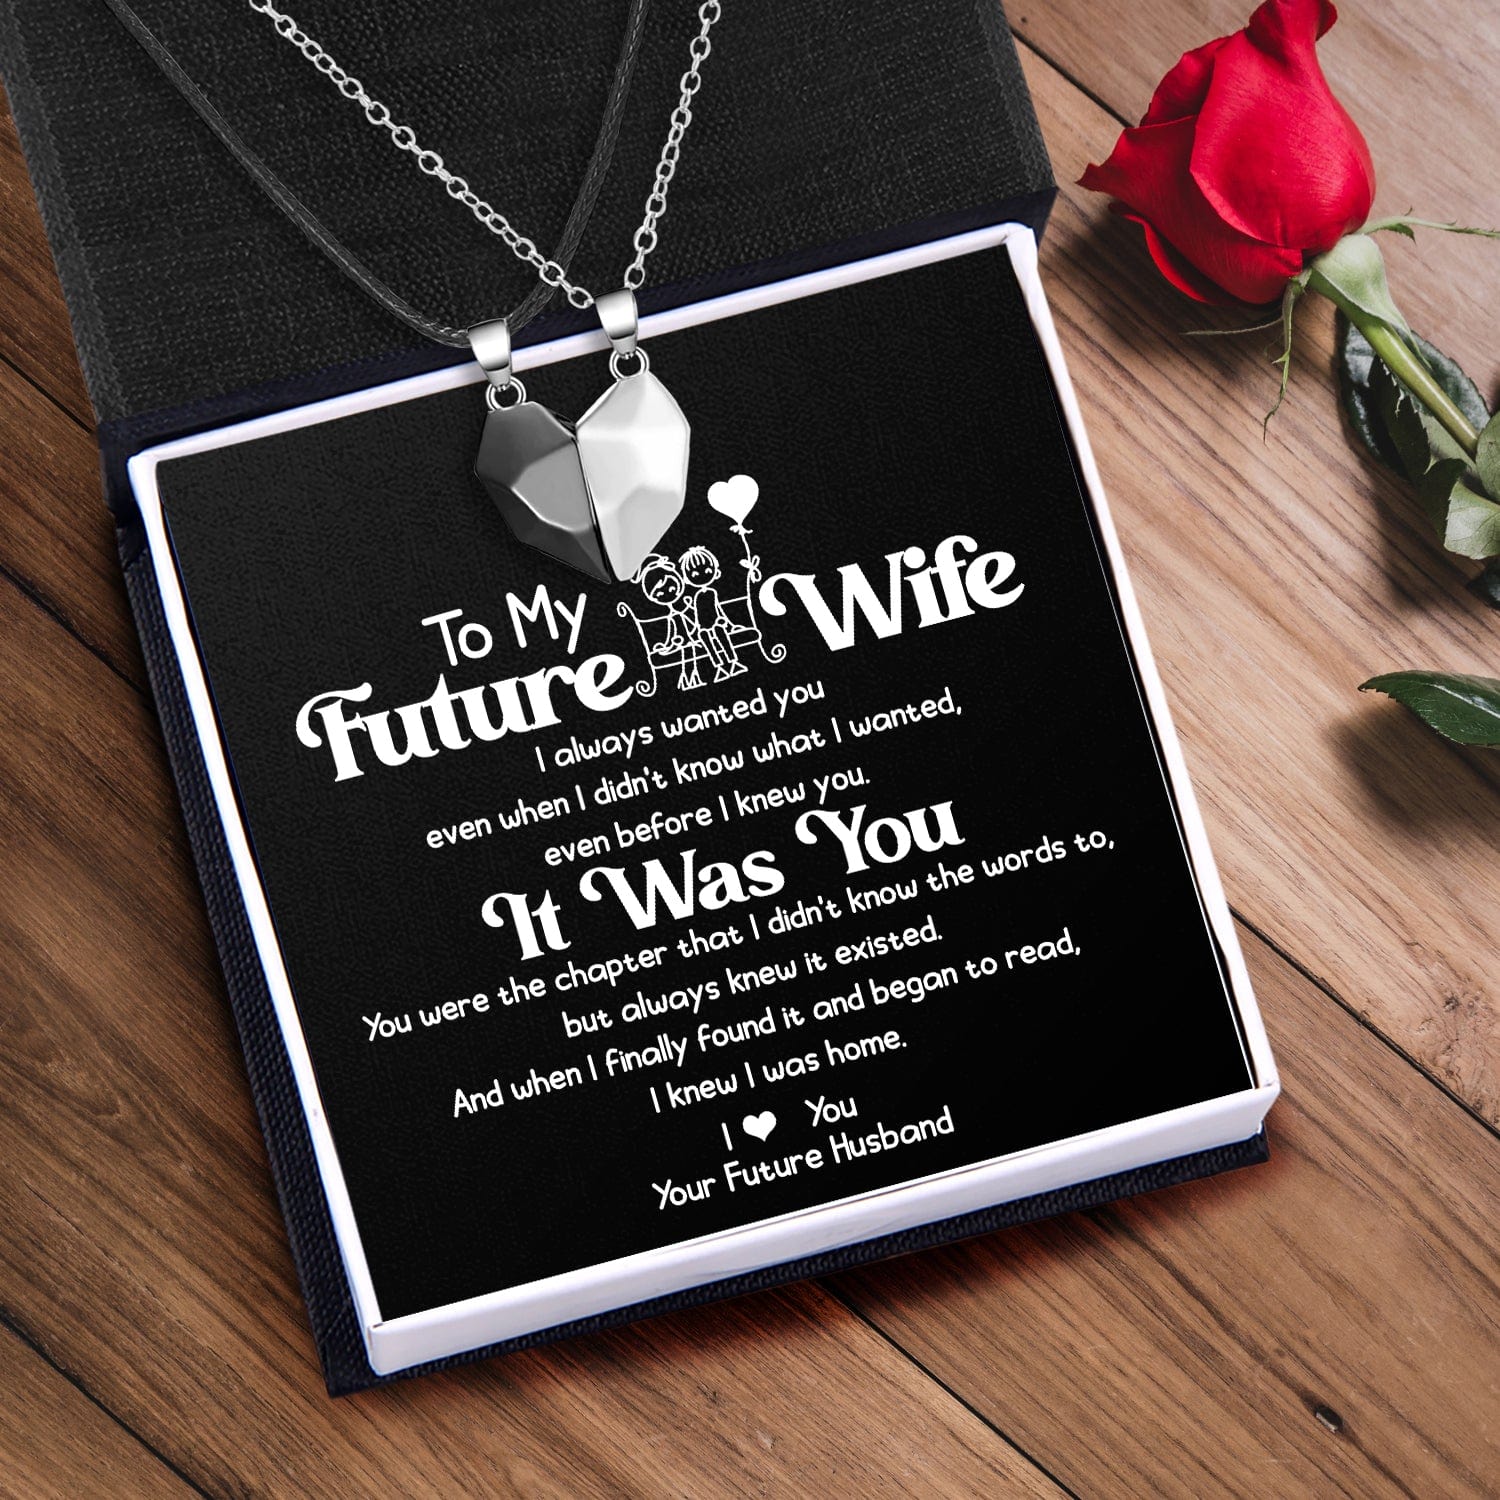 Magnetic Love Necklaces - Family - To My Future Wife - I Love You - Gnni25003